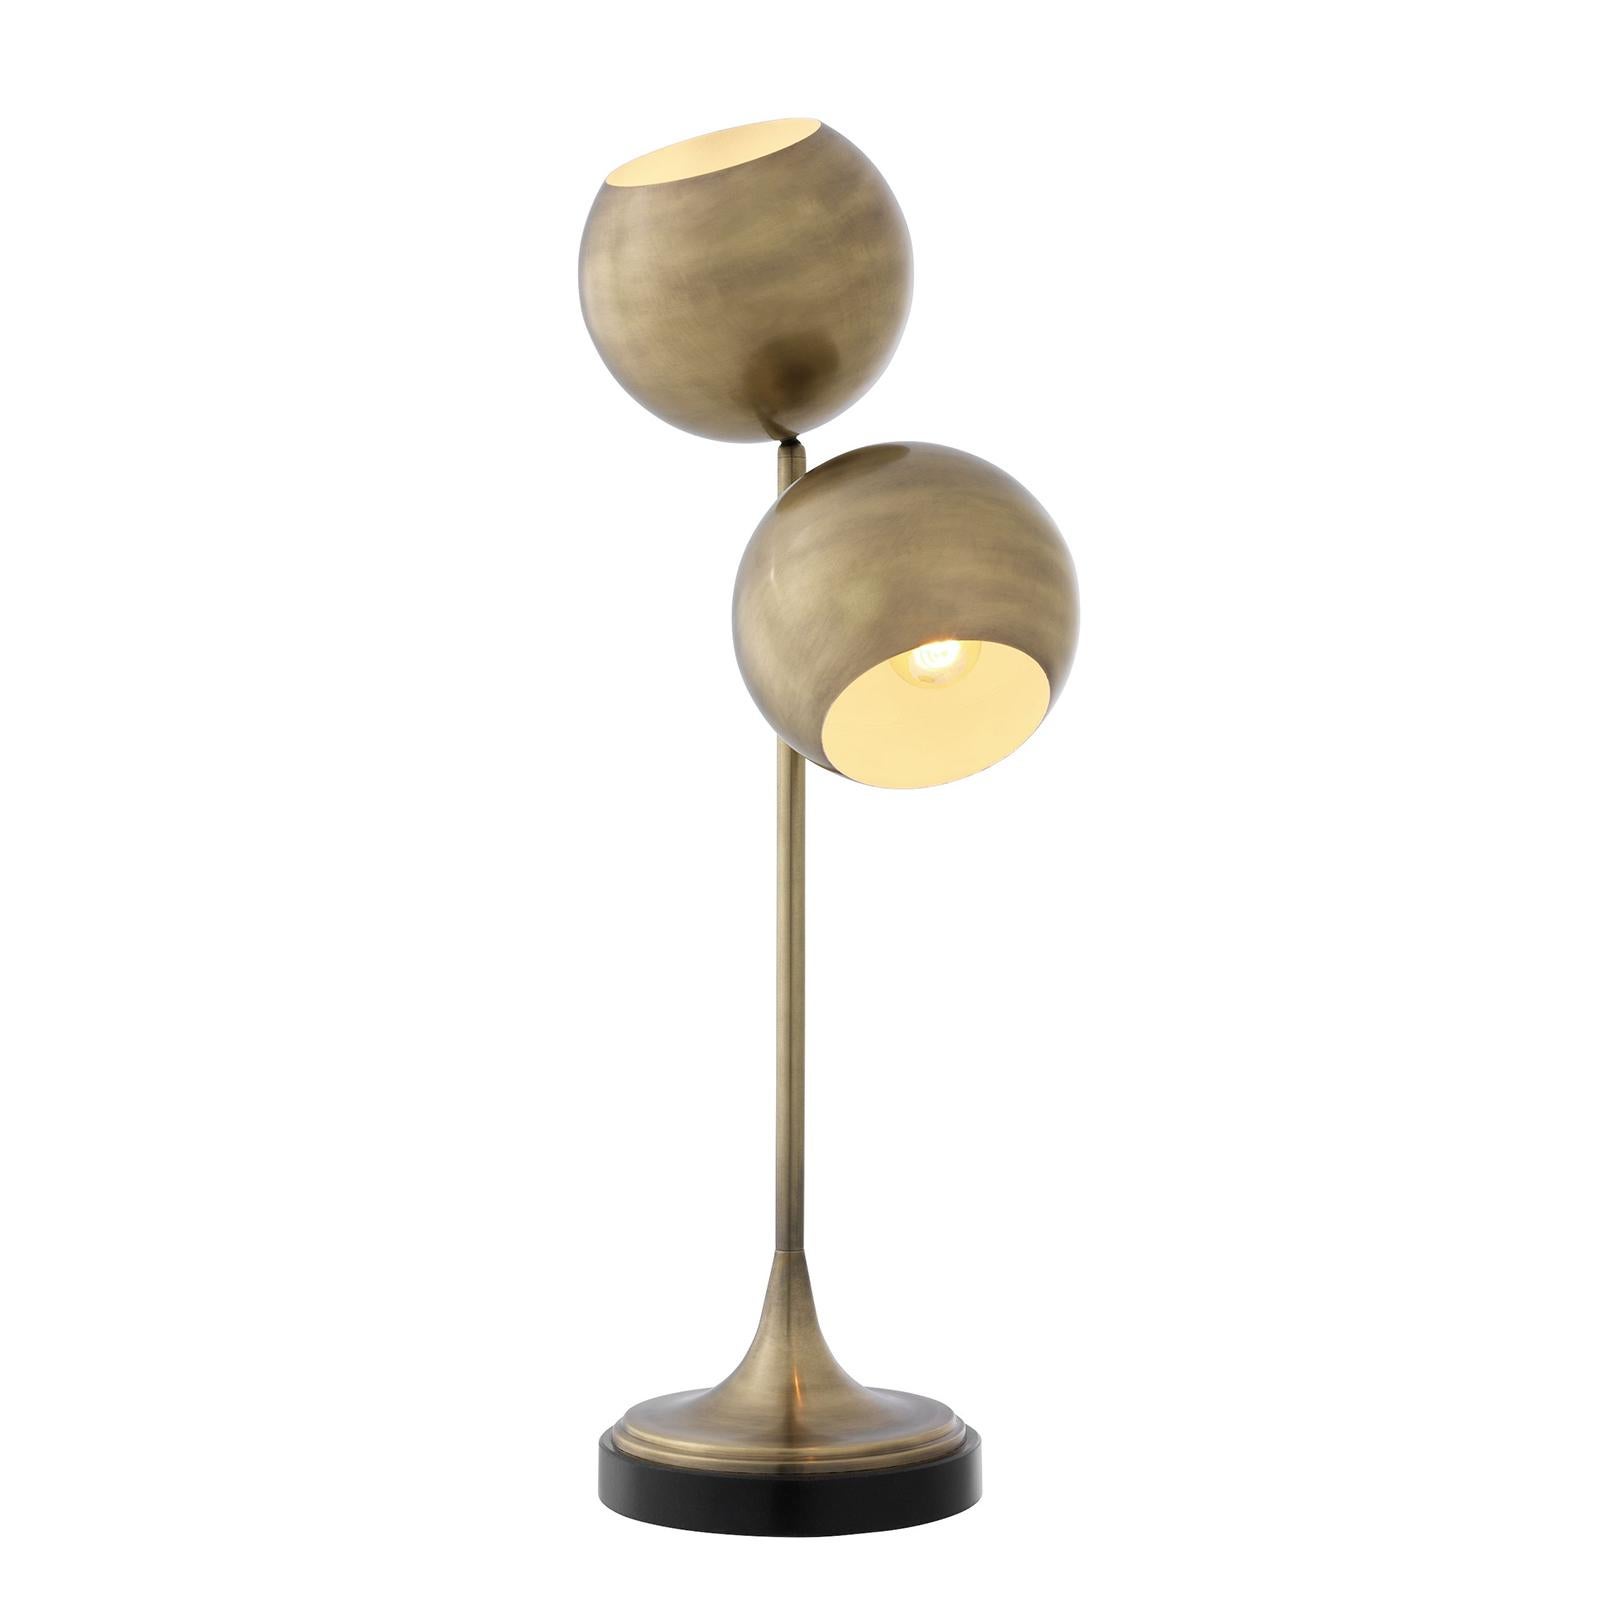 Table lamp twin with structure in solid brass in
vintage finish on black granite base. 2 bulbs, lamp
holder type E14, max 25 watt. Bulbs not included.
Also available in nickel finish. 
    